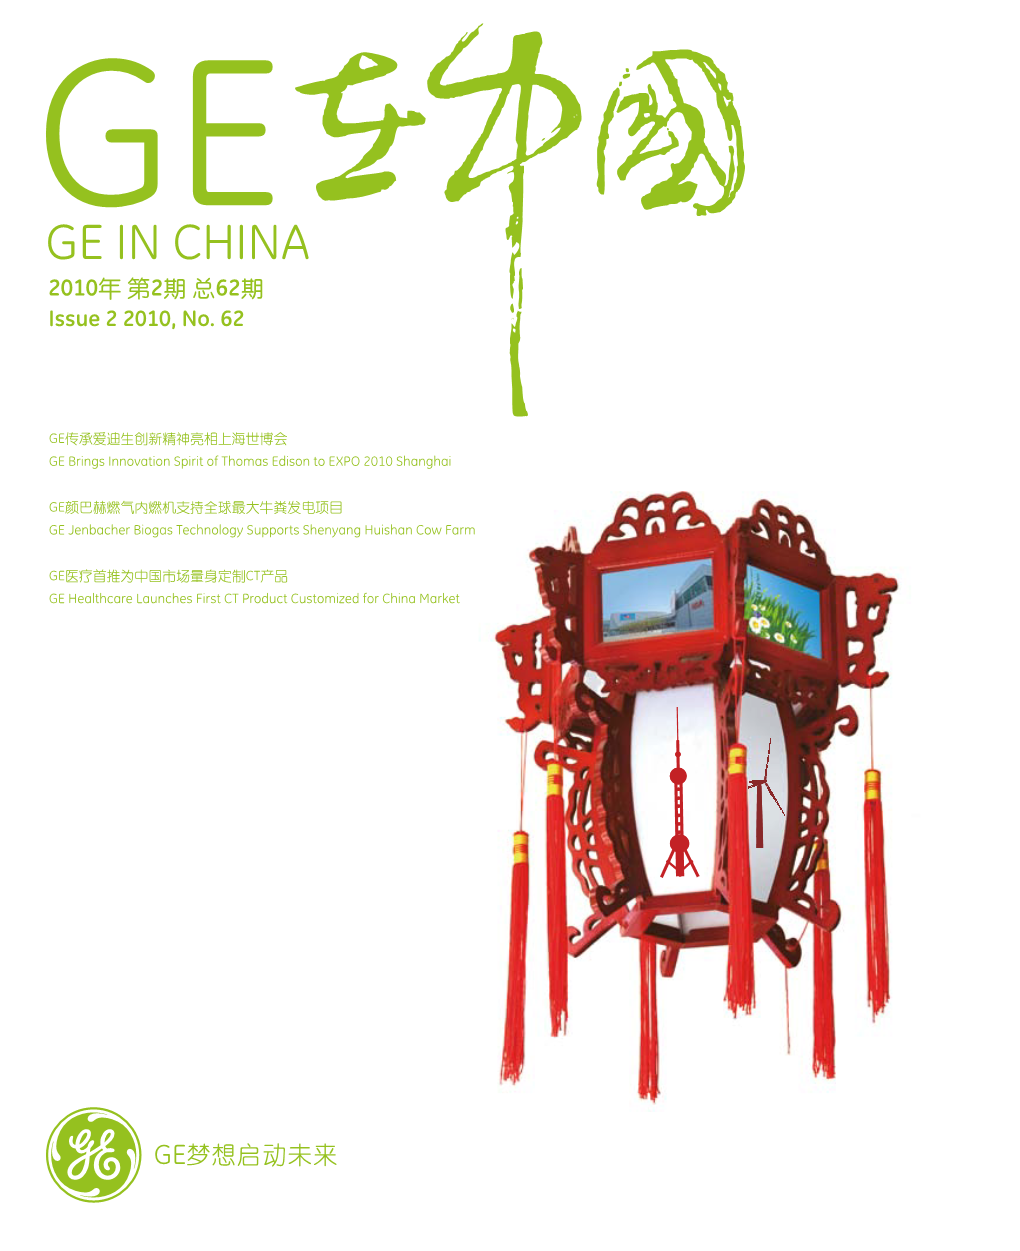 GE in CHINA 2010年 第2期 总62期 Issue 2 2010, No